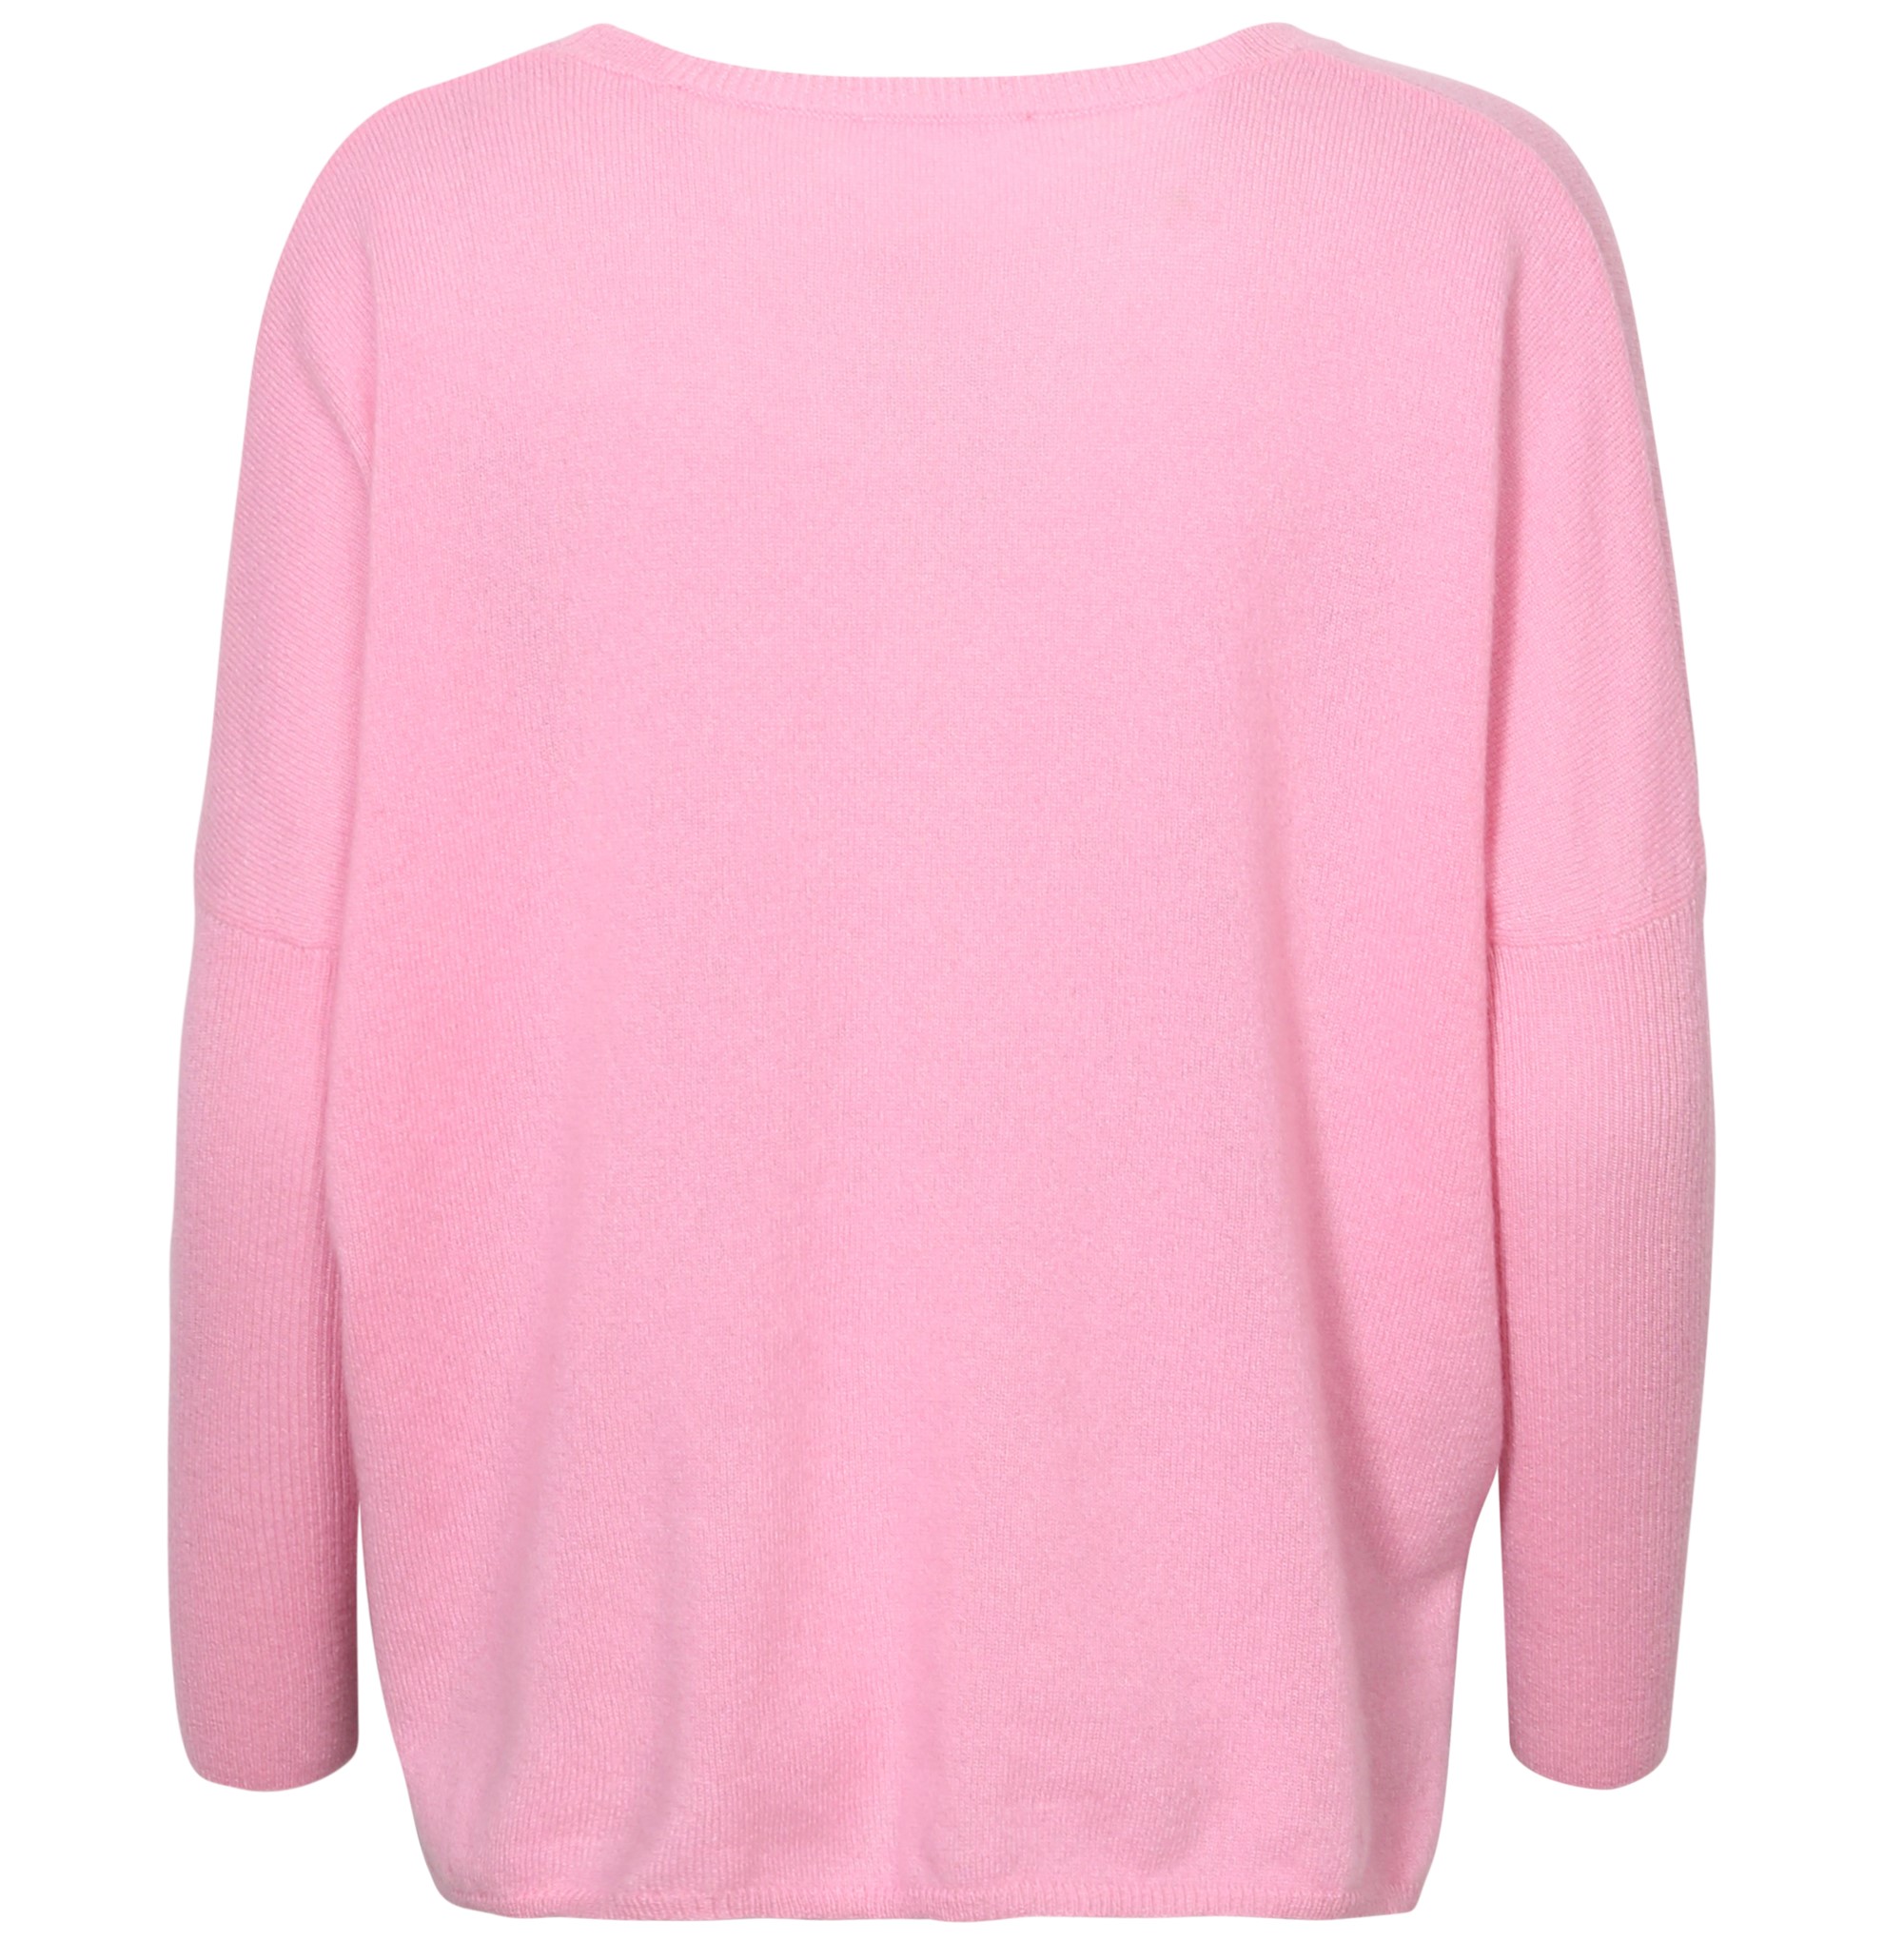 ABSOLUT CASHMERE Poncho Sweater Astrid in Light Pink L